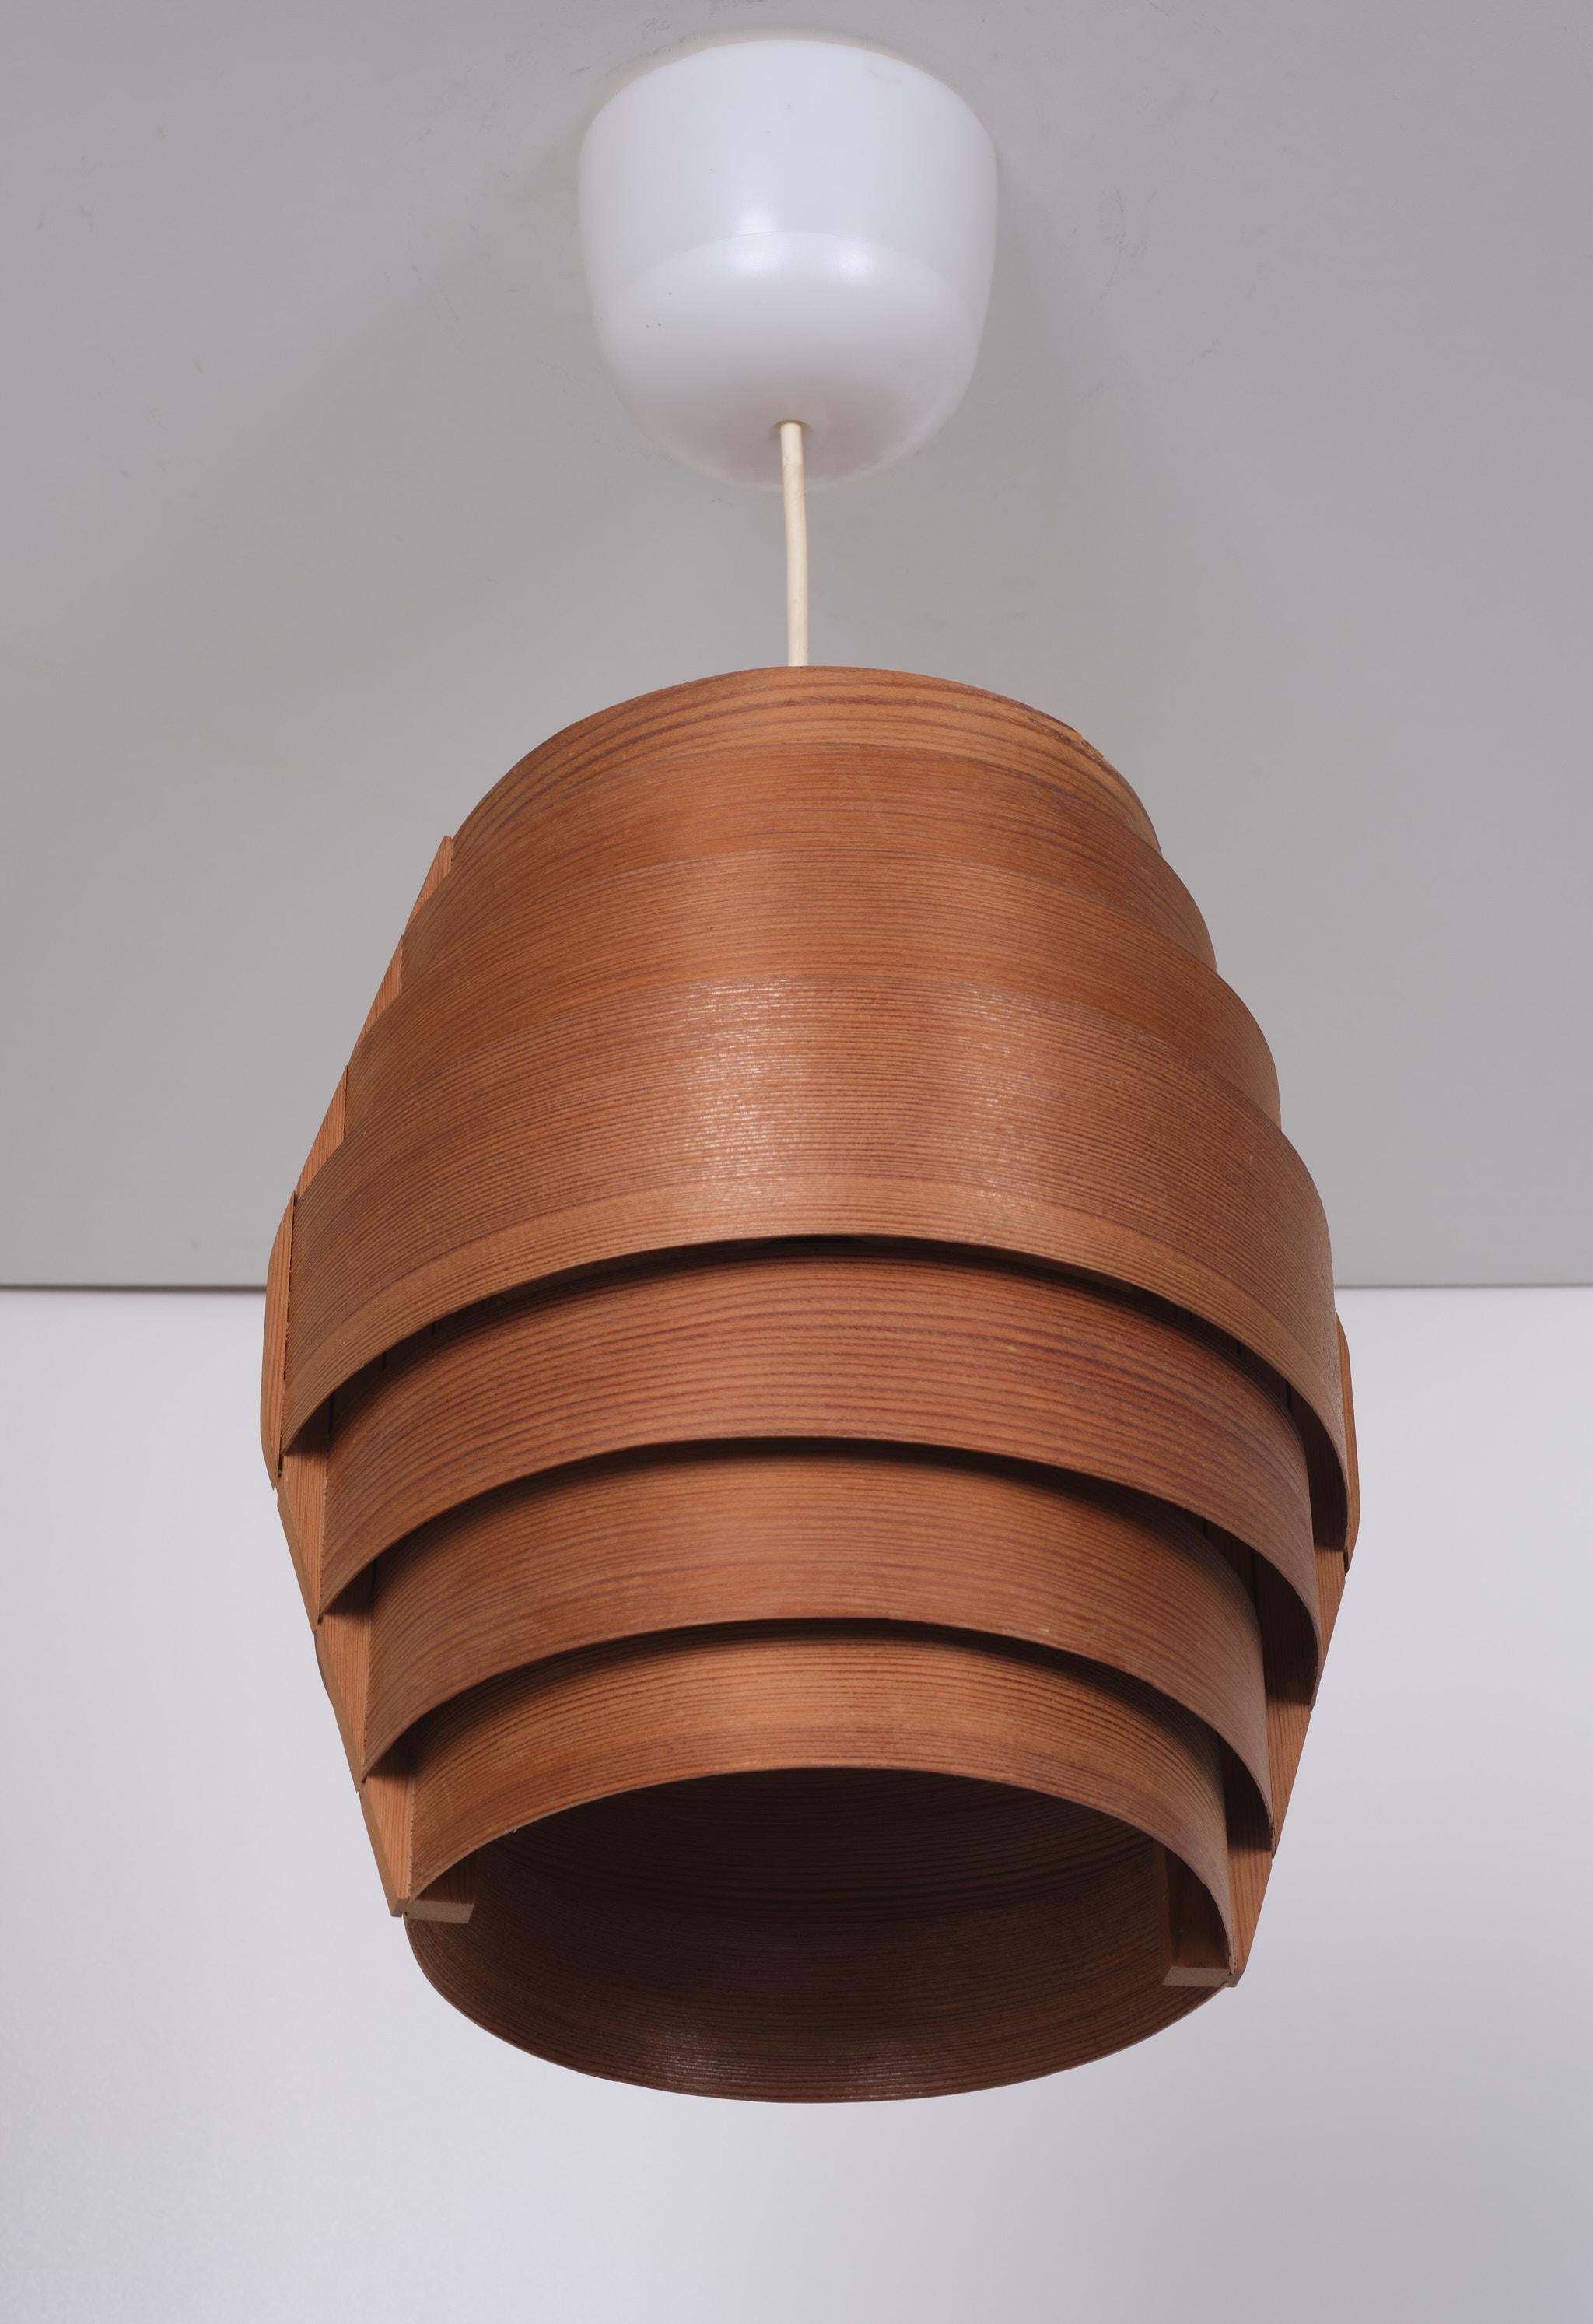 Mid-20th Century Hans Agne Jacobssen Hanging Lamp in Plywood 1960s Sweden For Sale